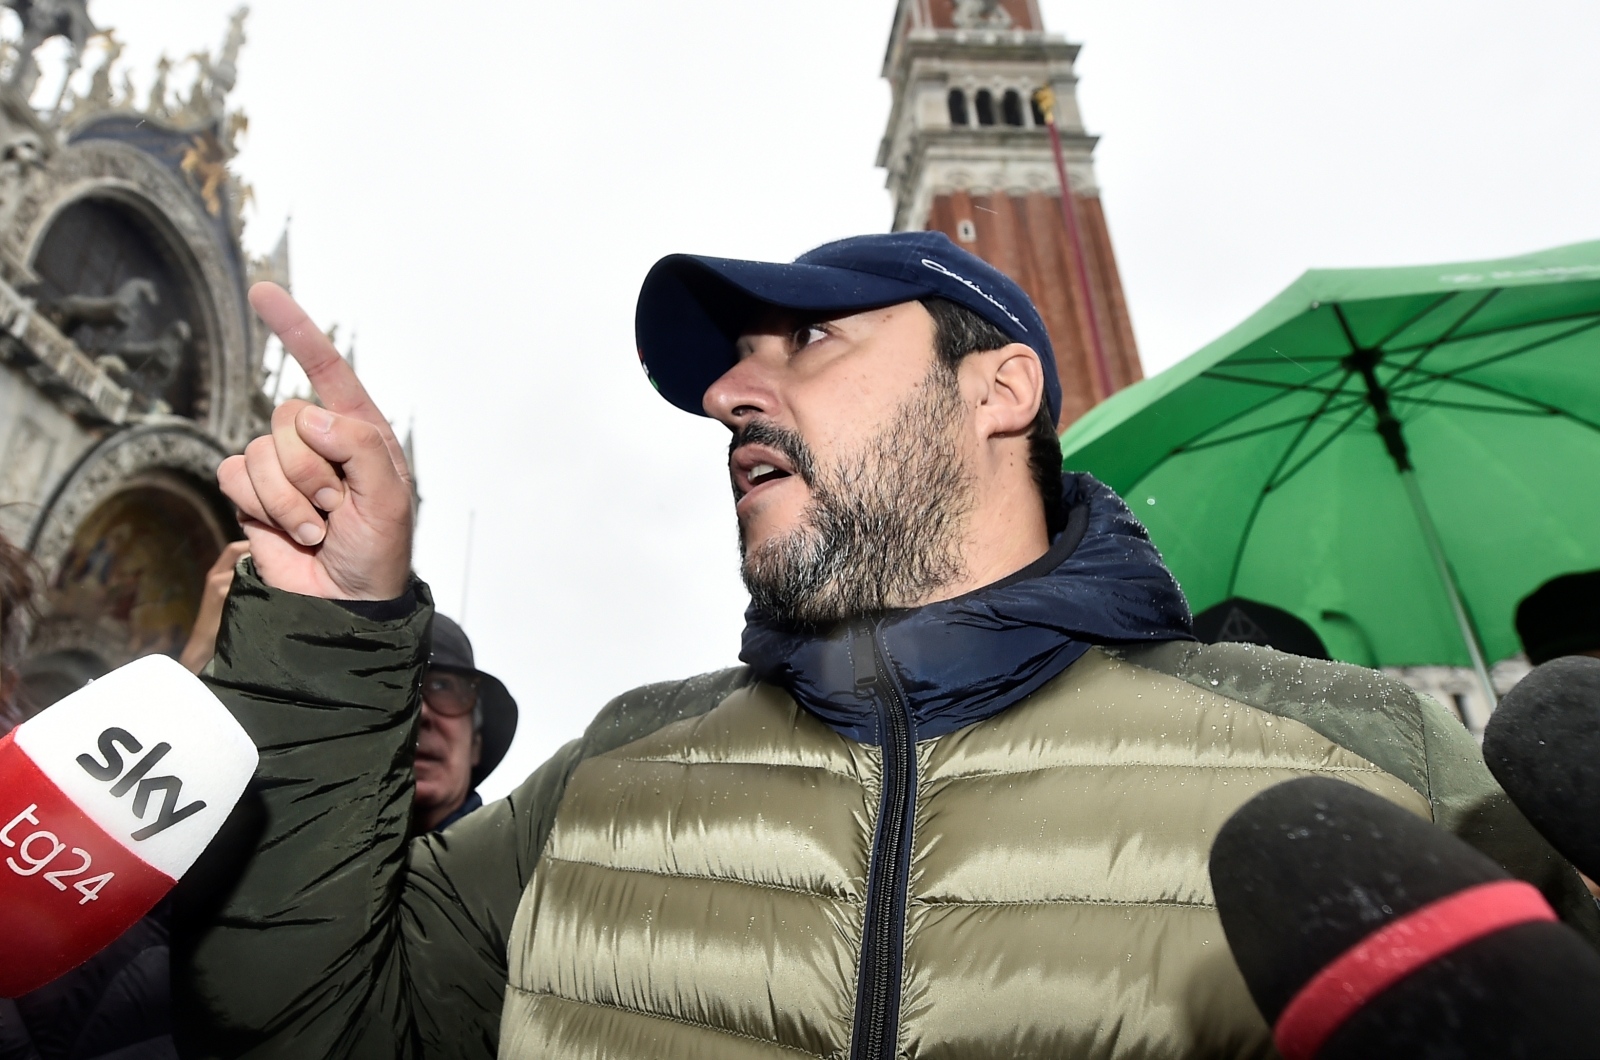 Flooding in the lagoon city of Venice League party leader Matteo Salvini gestures as he visits the flooded St. Mark's Square, as high tide reaches peak, in Venice, Italy November 15, 2019. REUTERS/Flavio Lo Scalzo FLAVIO LO SCALZO